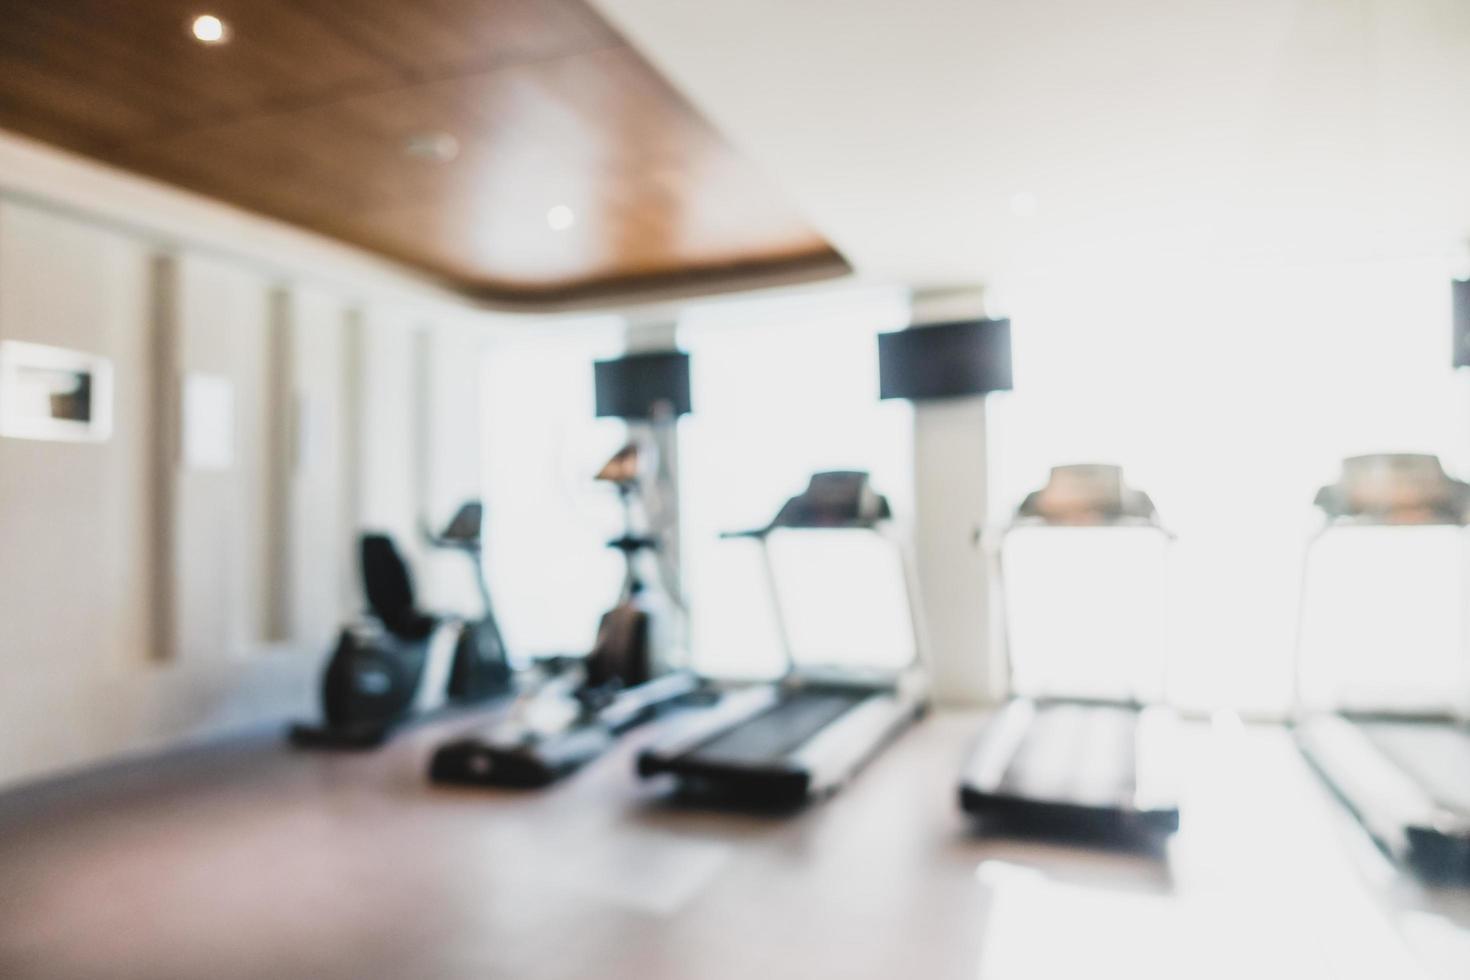 Abstract blur and defocused fitness equipment in gym interior photo